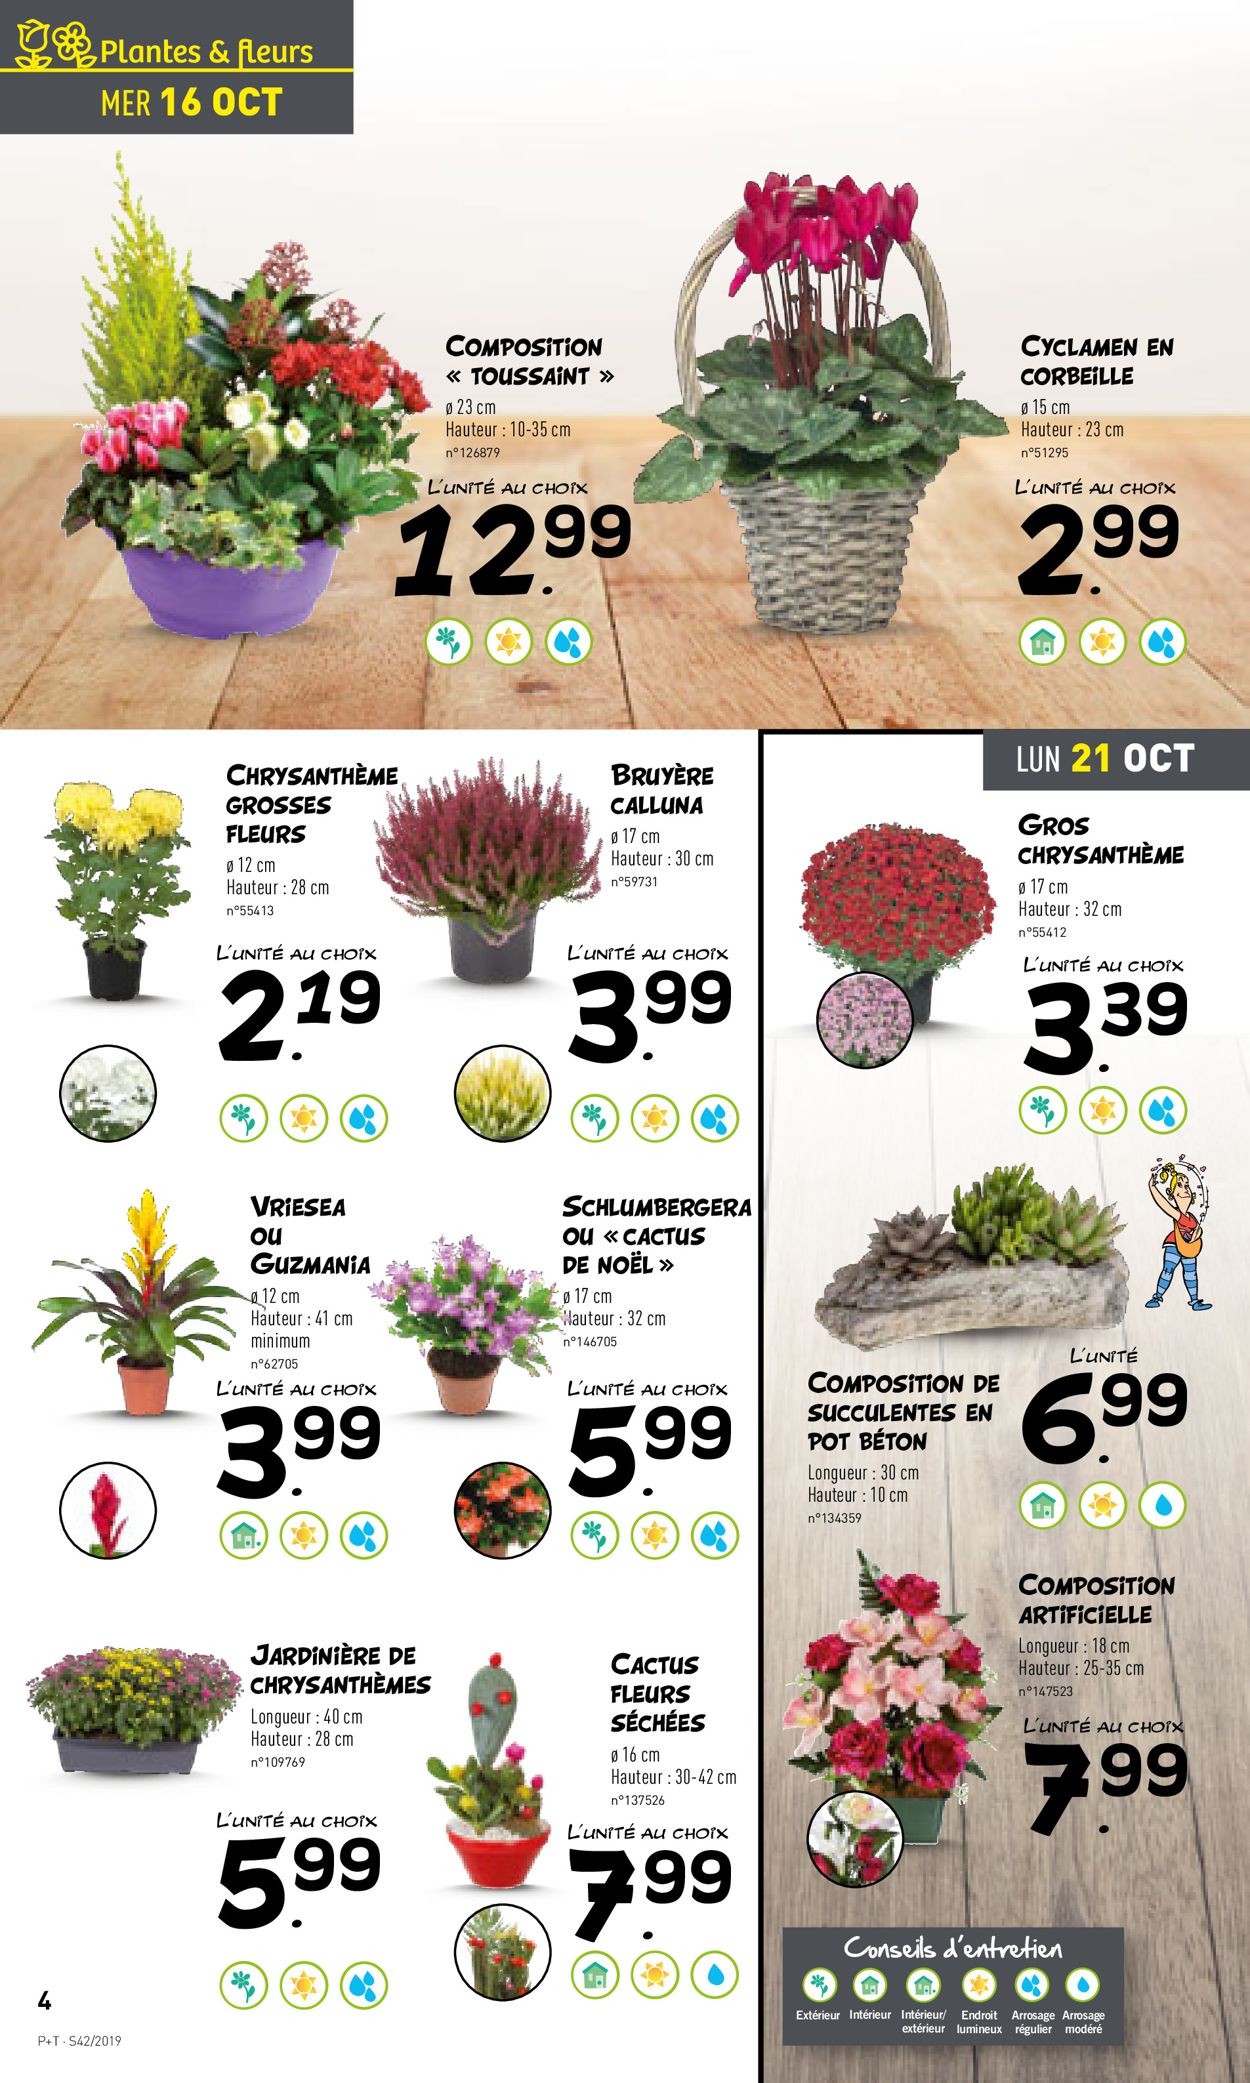 Lidl Catalogue - 16.10-22.10.2019 (Page 4)